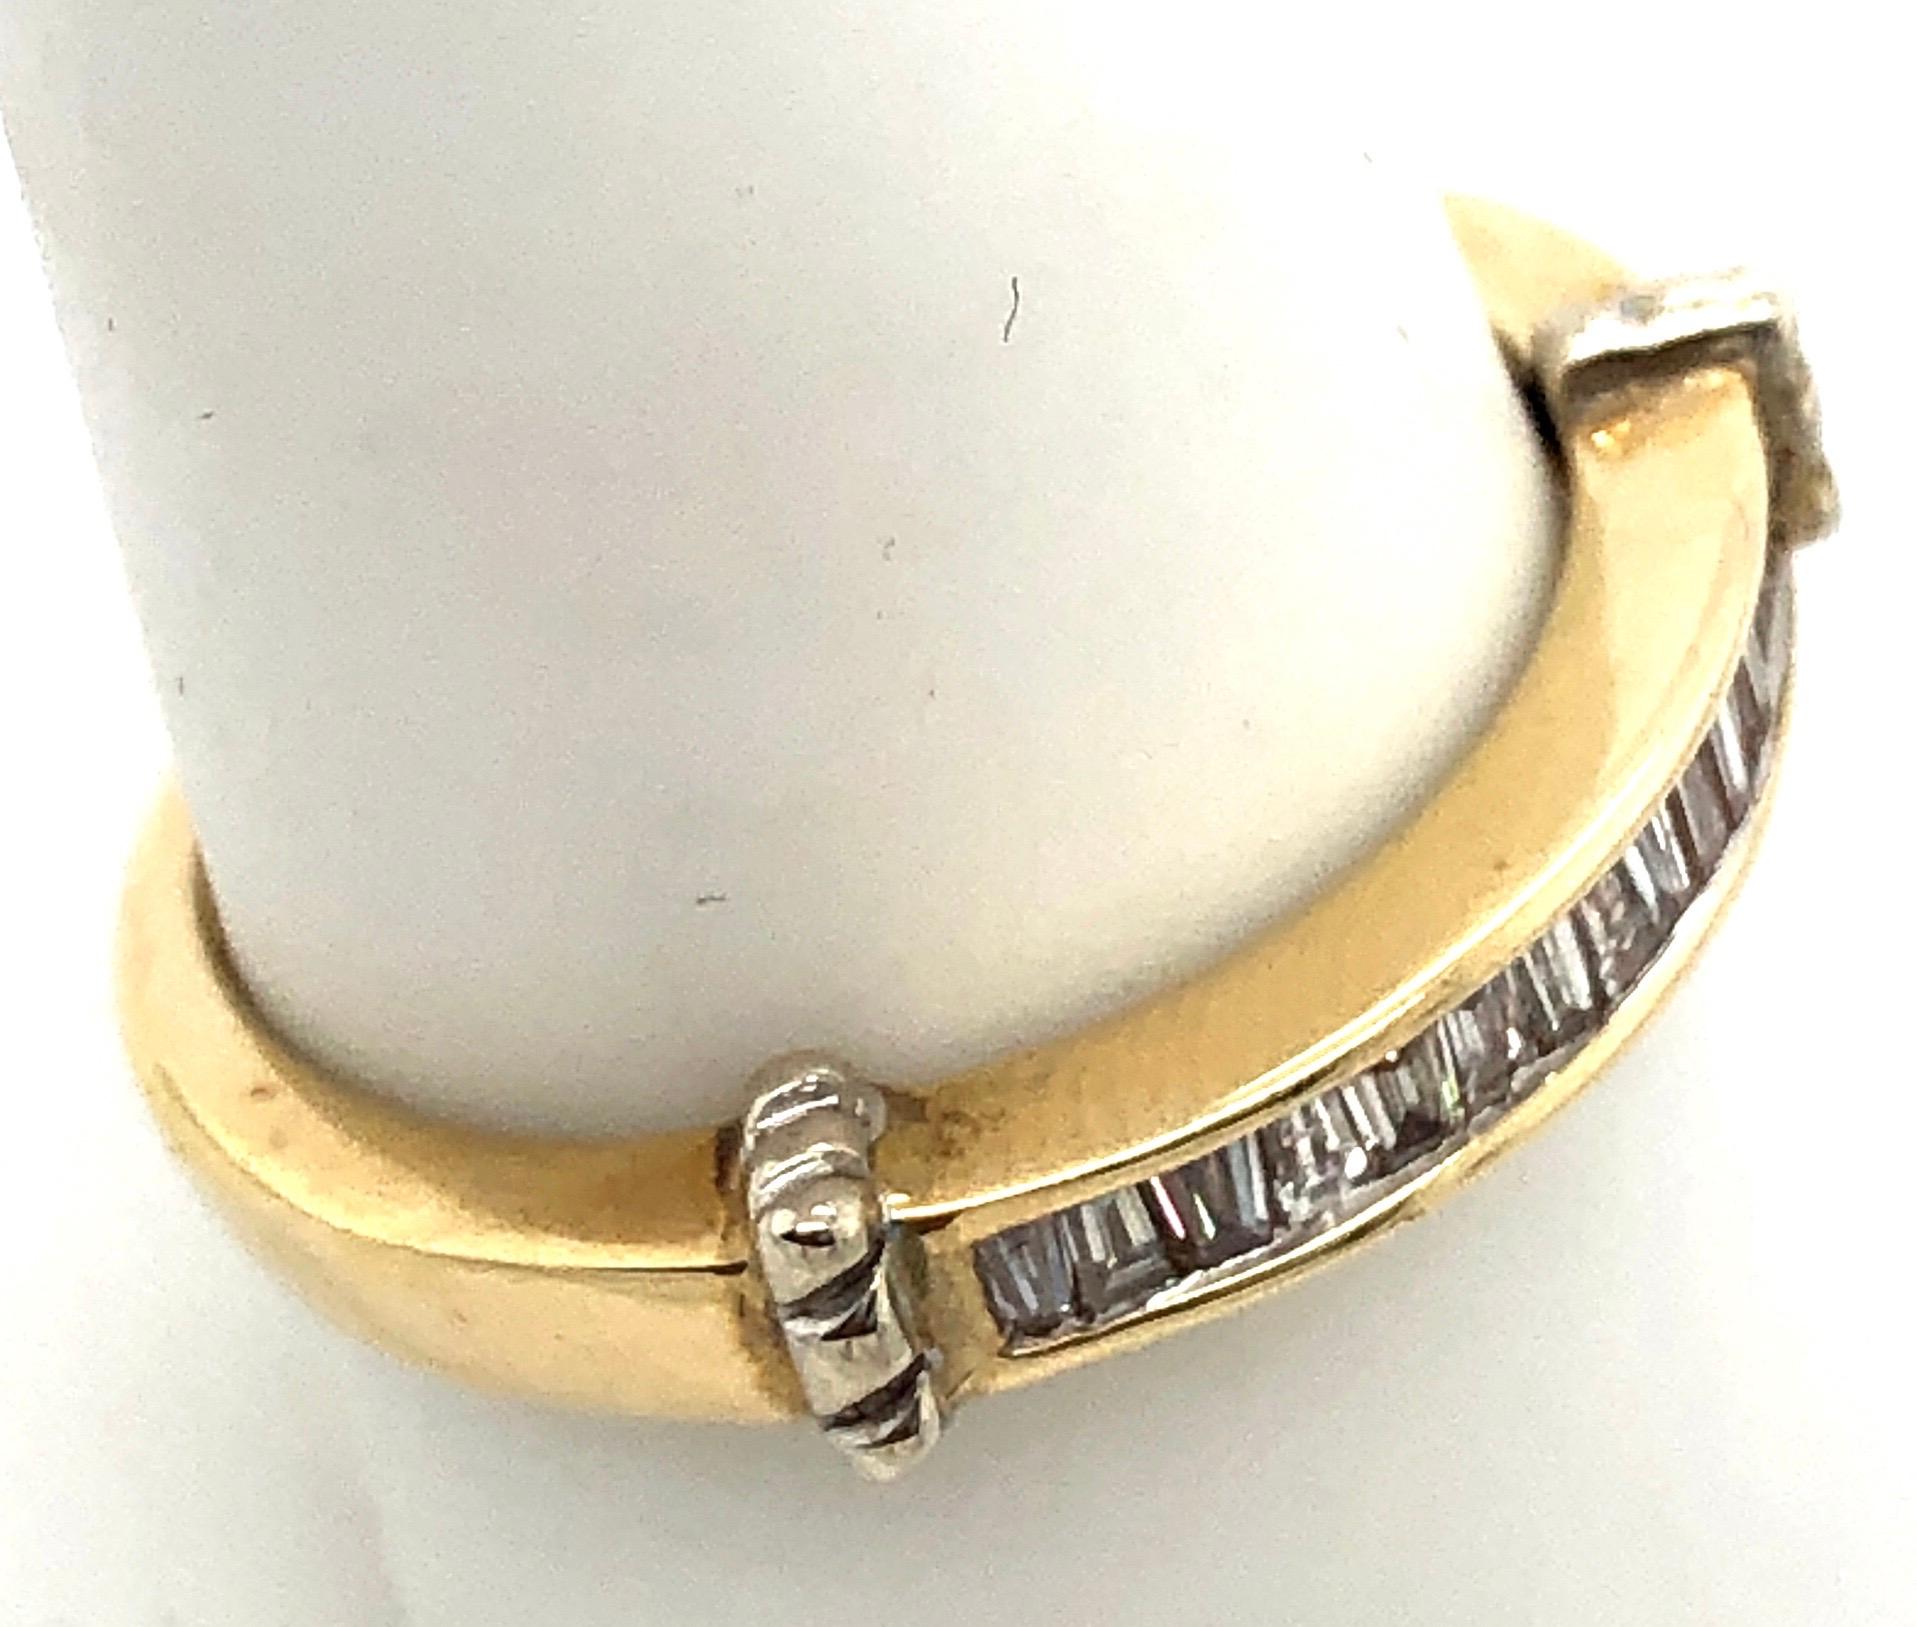 14 Karat Yellow and White Gold Band Ring with Baguette Diamonds Size 8.5.
0.50 total diamond weight.
3 grams total weight.